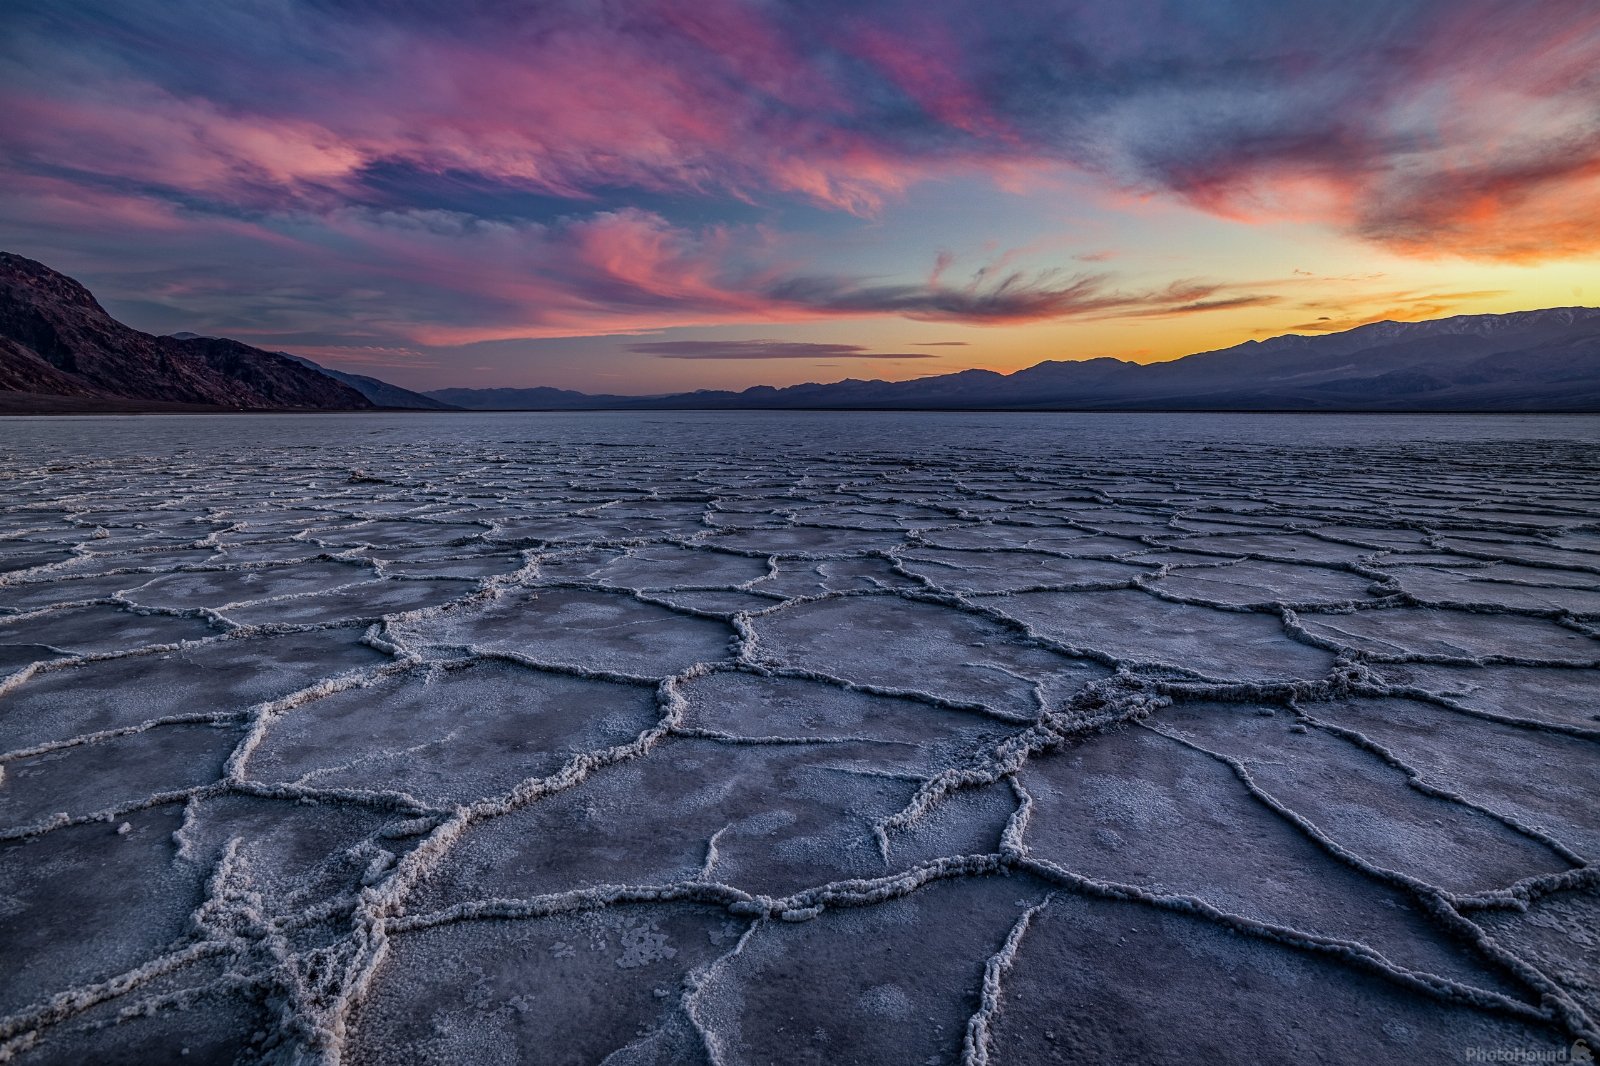 Image of Badwater Salt Flats, Death Valley National Park by Jeff Sullivan